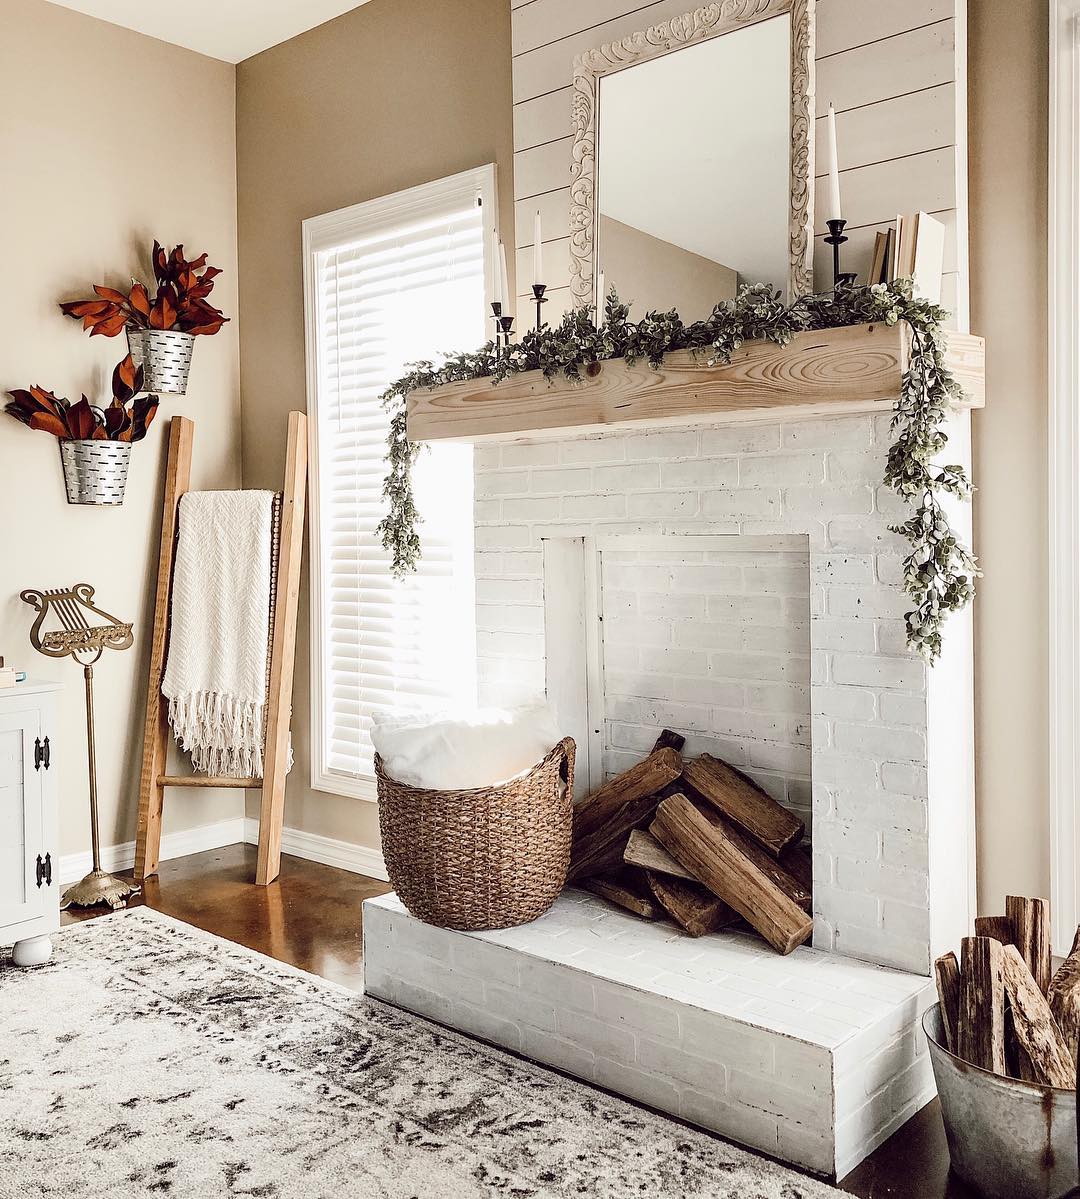 White fireplace and neutral beige walls. Photo by Instagram user @kristenfortier